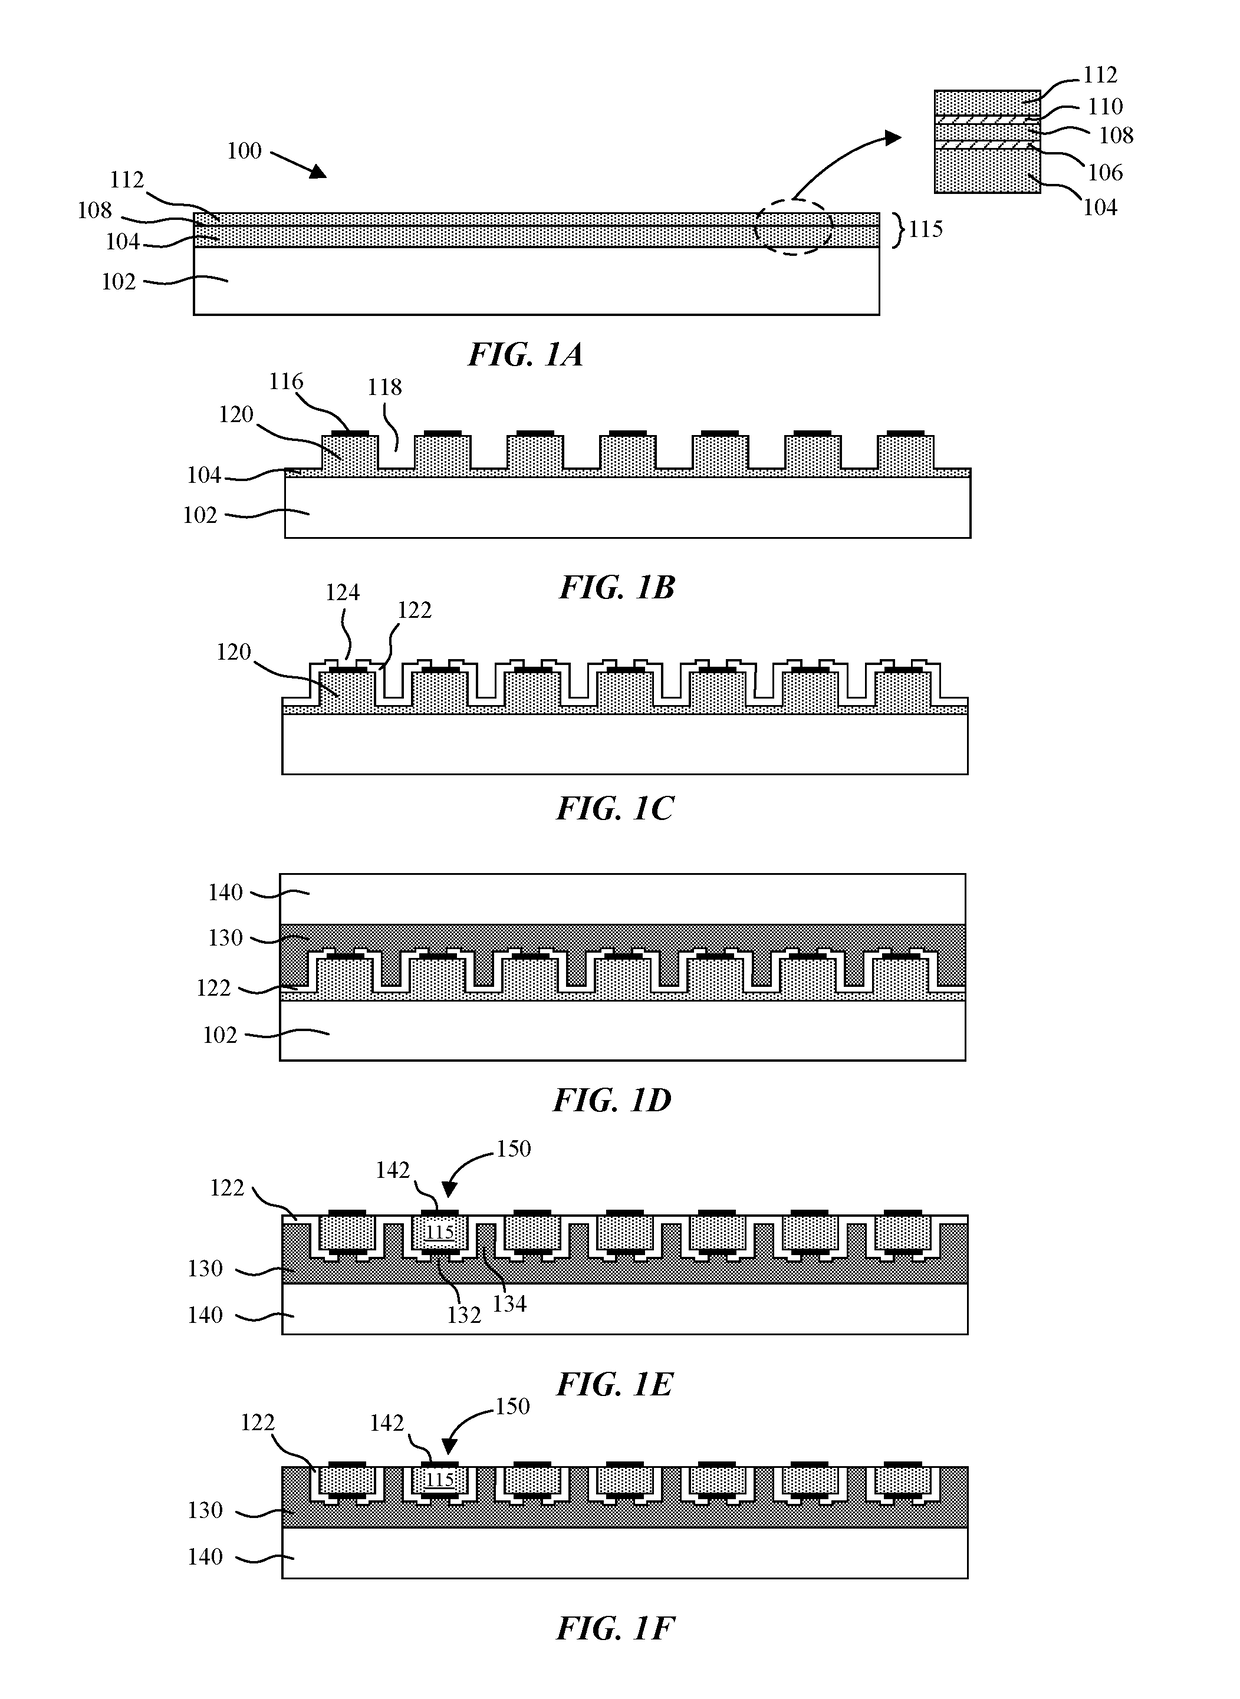 LED structures for reduced non-radiative sidewall recombination